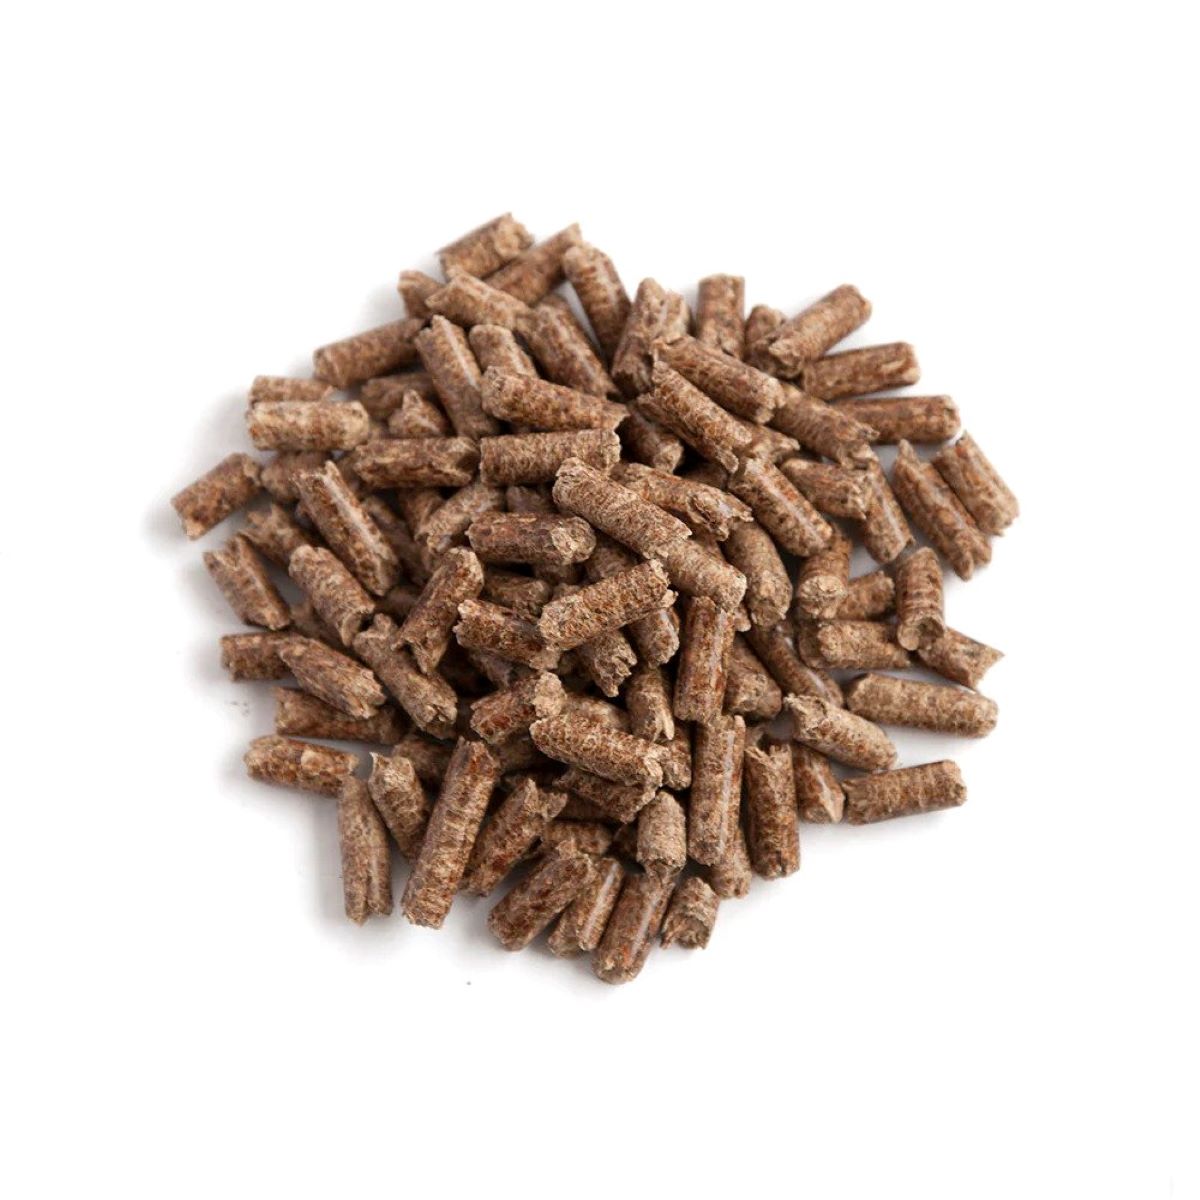 How To Store Smoker Pellets